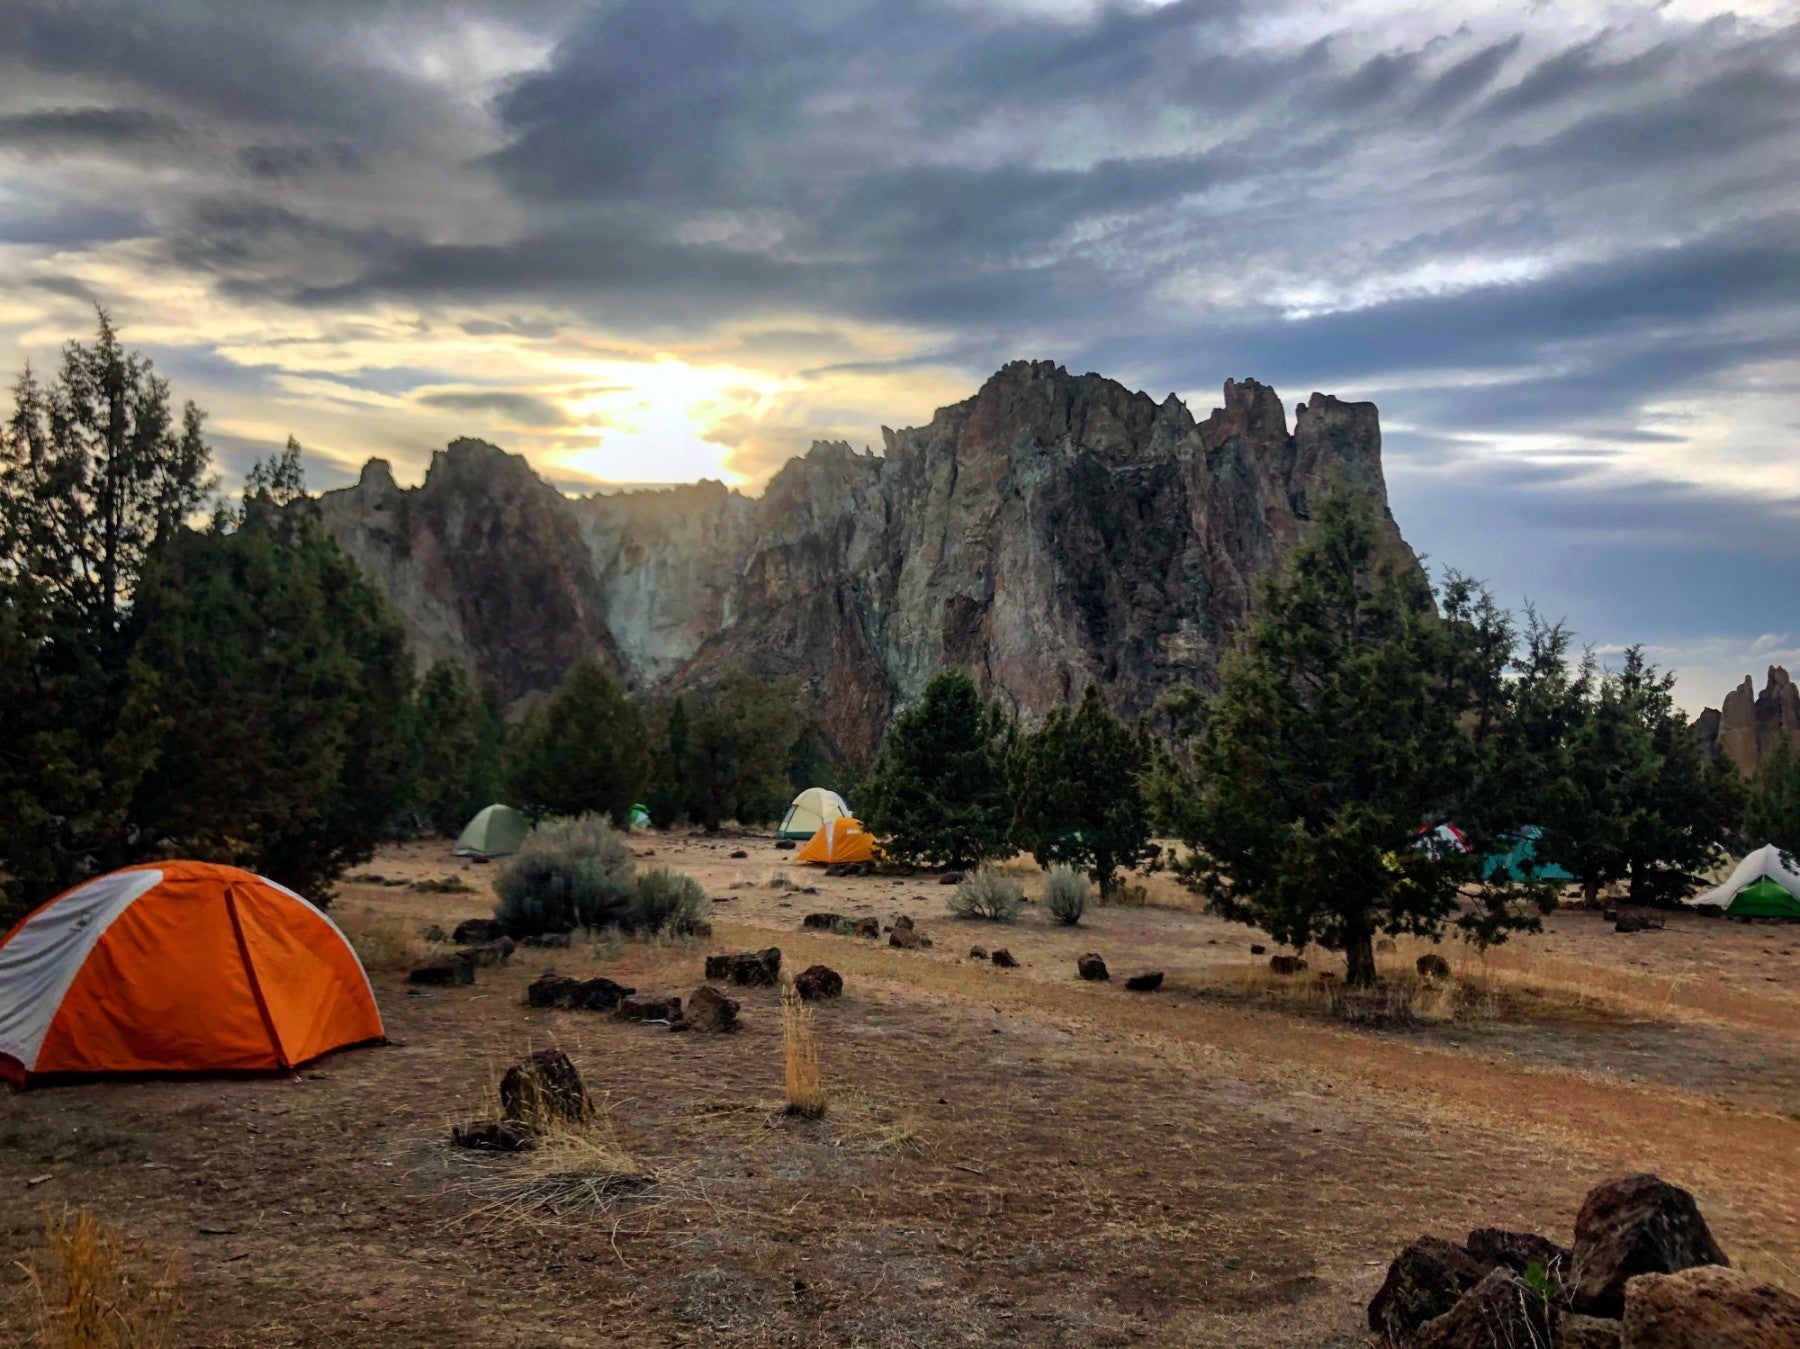 sunset over a campsite at smith rock state park